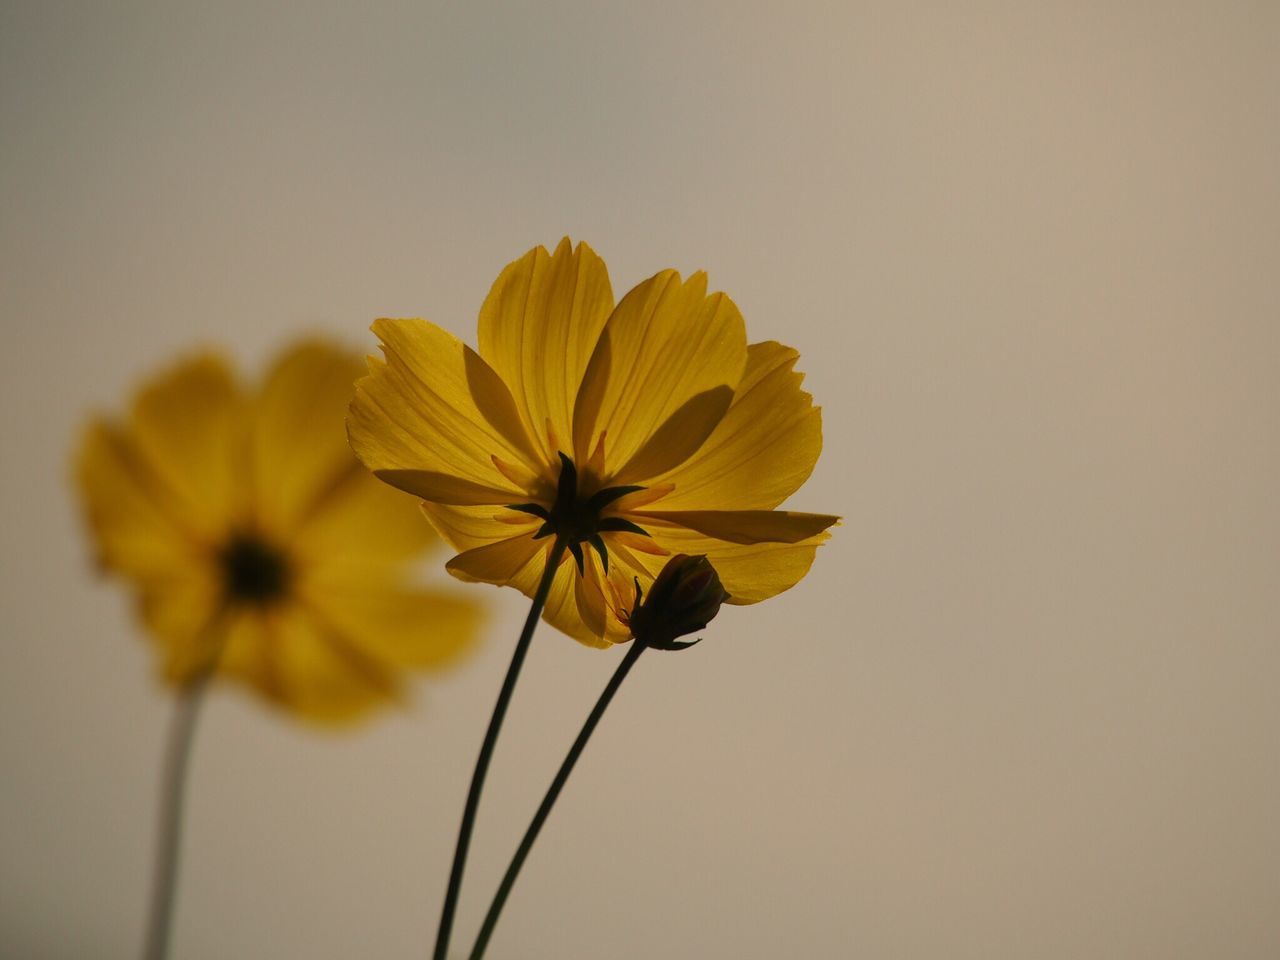 flower, petal, fragility, flower head, beauty in nature, nature, yellow, freshness, growth, plant, blooming, no people, close-up, cosmos flower, outdoors, day, black-eyed susan